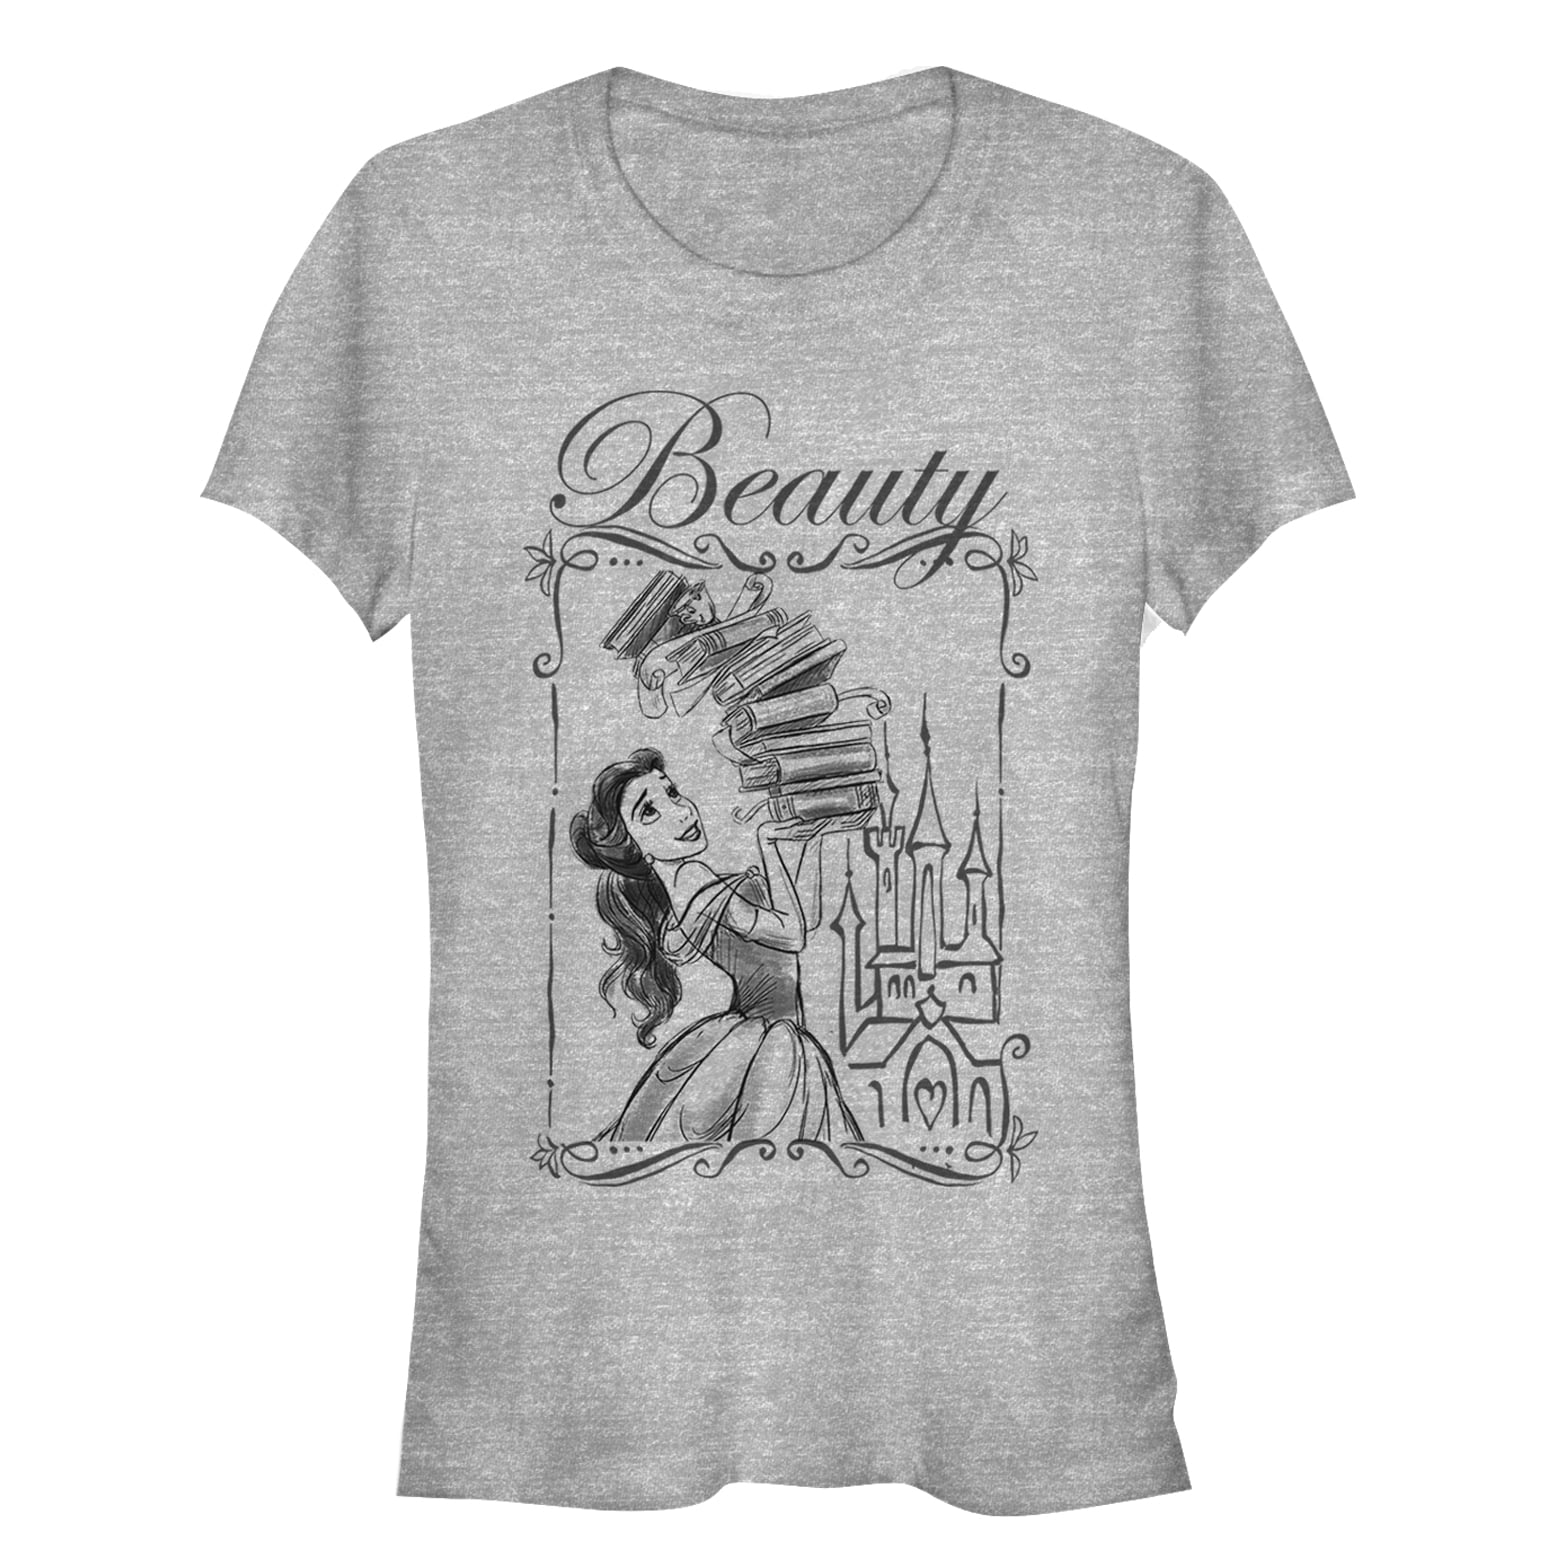 Kleding Unisex kinderkleding Tops & T-shirts Vintage 90s RARE Disney's Beauty and The Beast Belle Graphic T Shirt Youth Large 